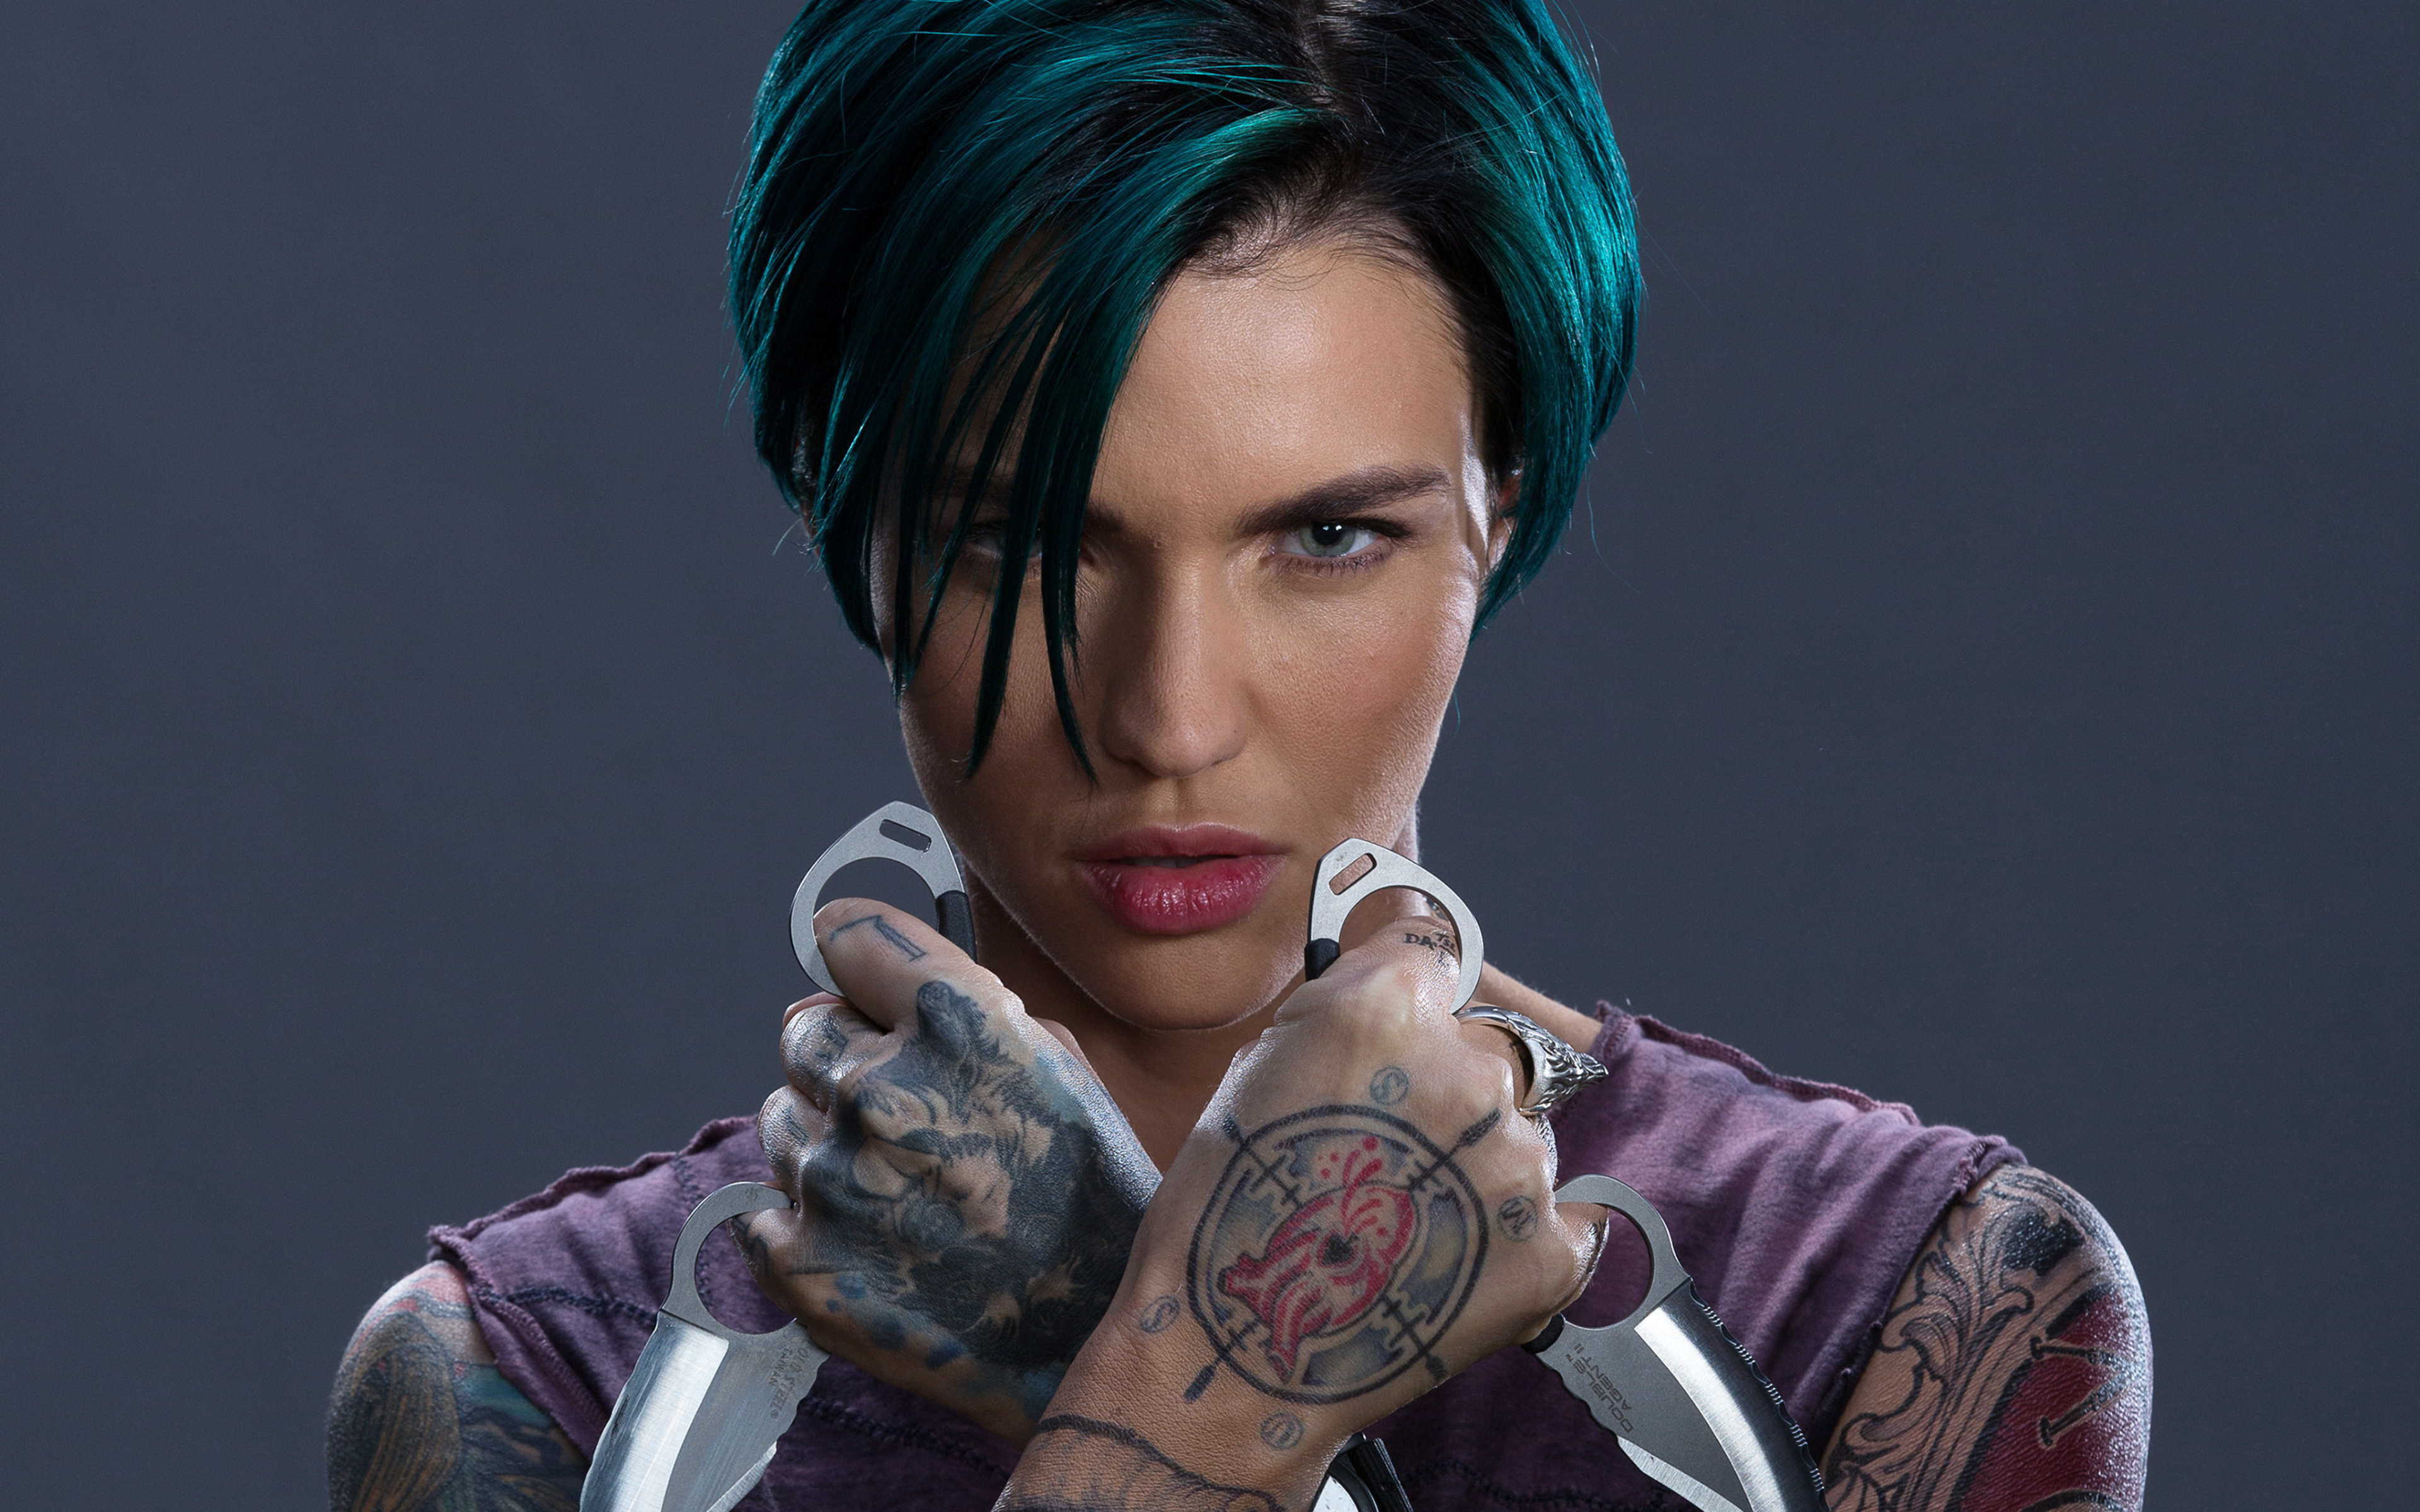 Ruby Rose Face Short Hair Tattoo XXx Return Of Xander Cage Actress 3840x2400